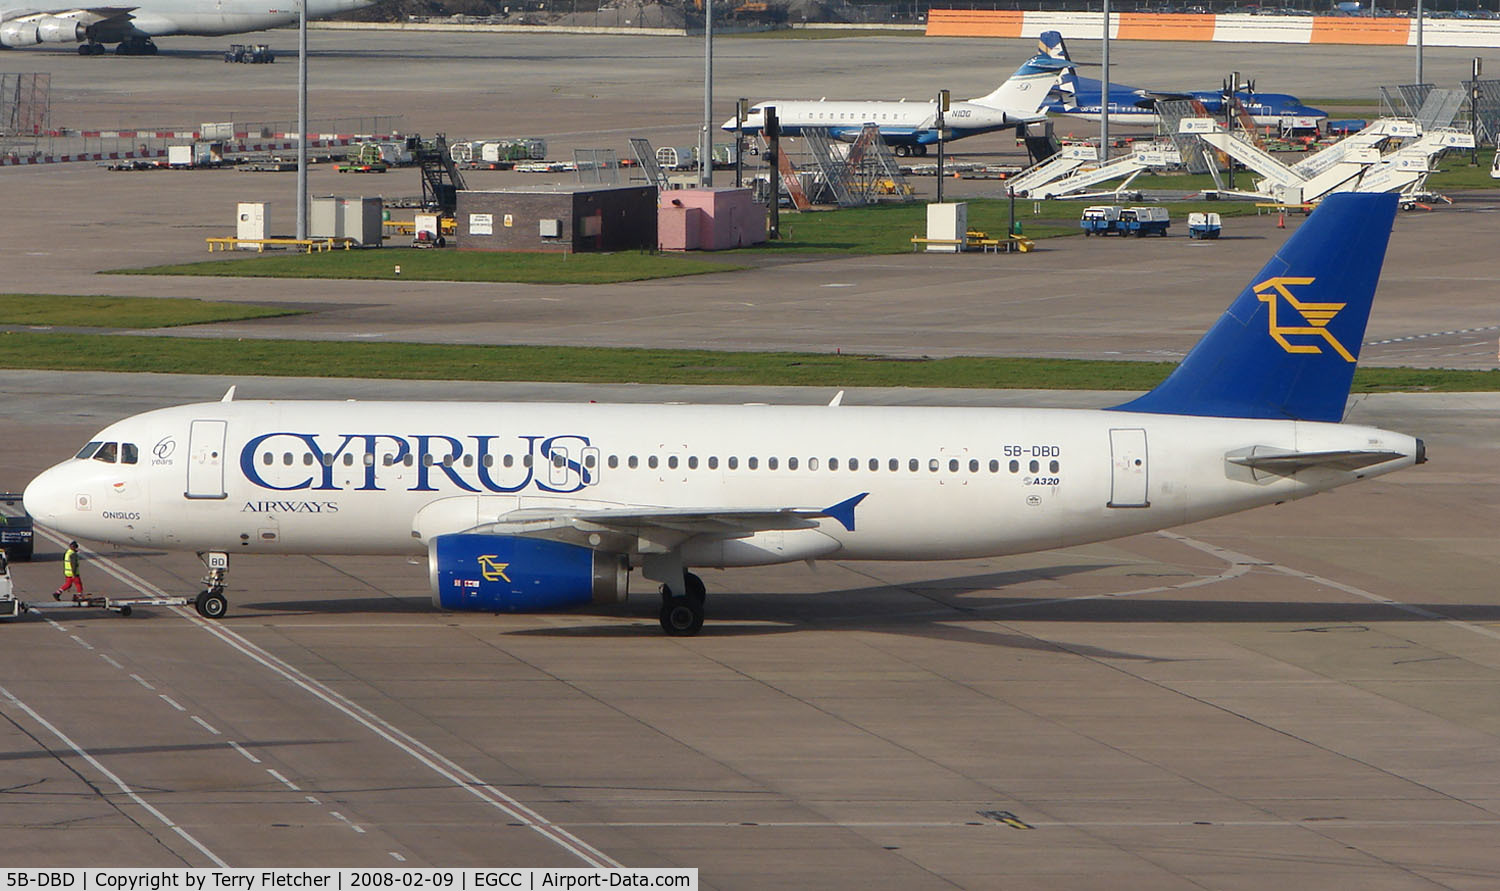 5B-DBD, 1992 Airbus A320-231 C/N 316, Cyprus Airways A320s are regular visitors to Manchester